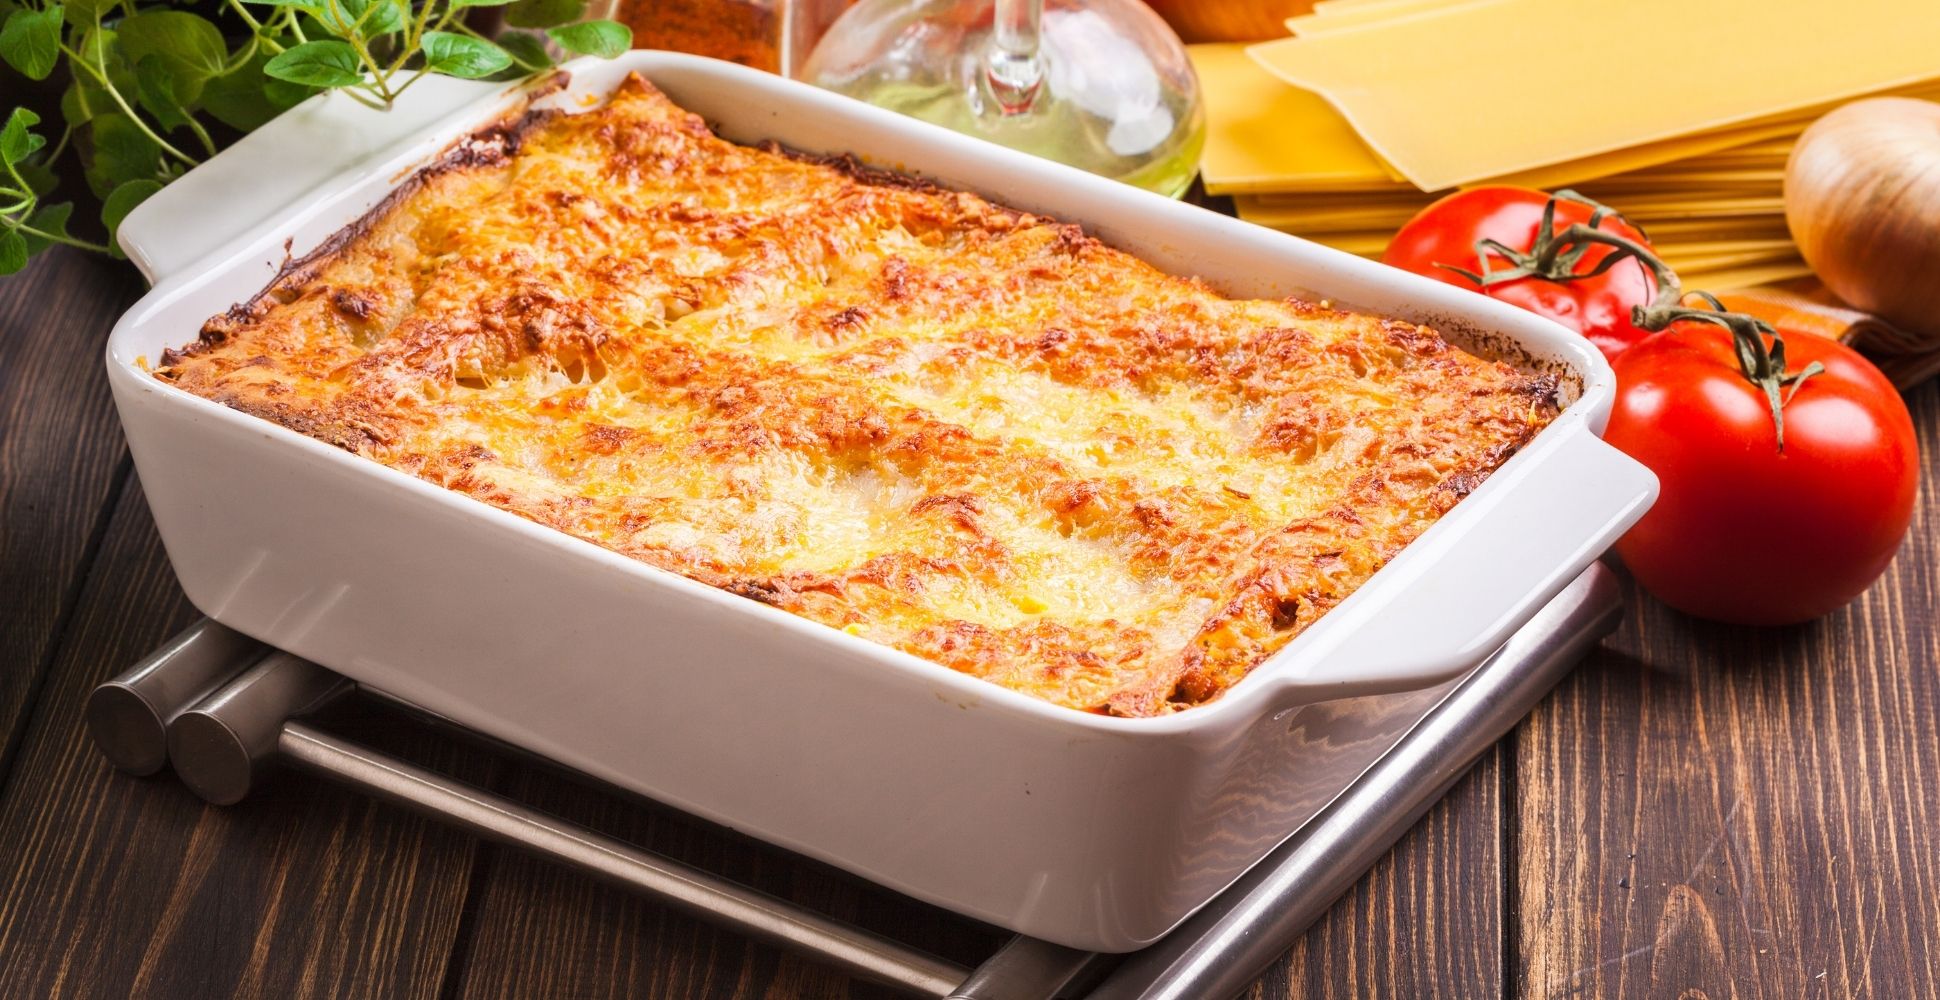 5 Best Lasagna Dishes UK (2022 Review) | Spruce Up!